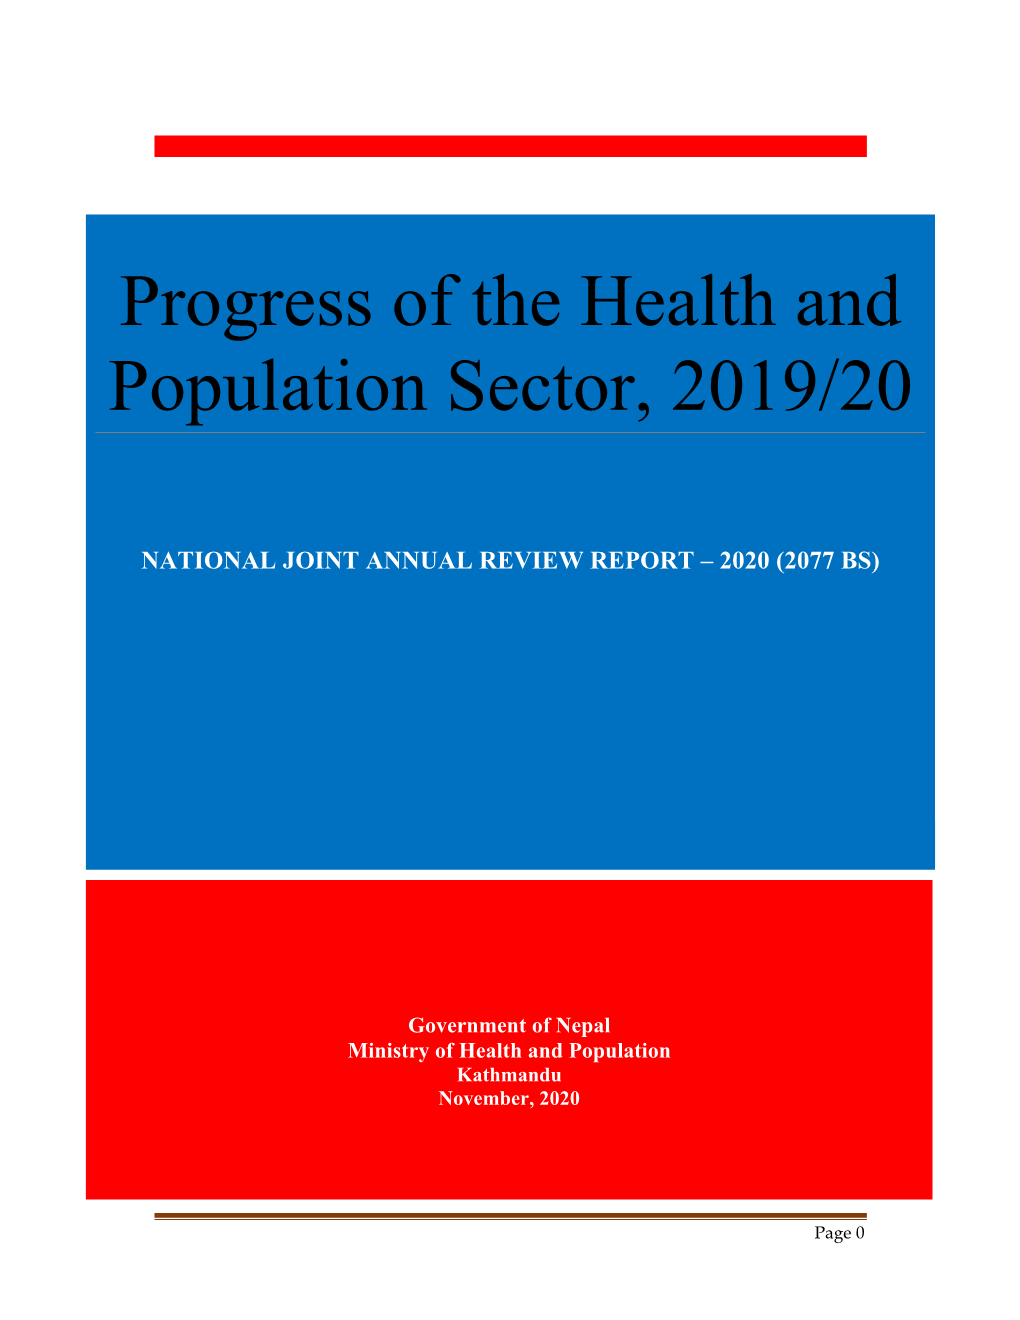 Progress of the Health and Population Sector, 2019/20